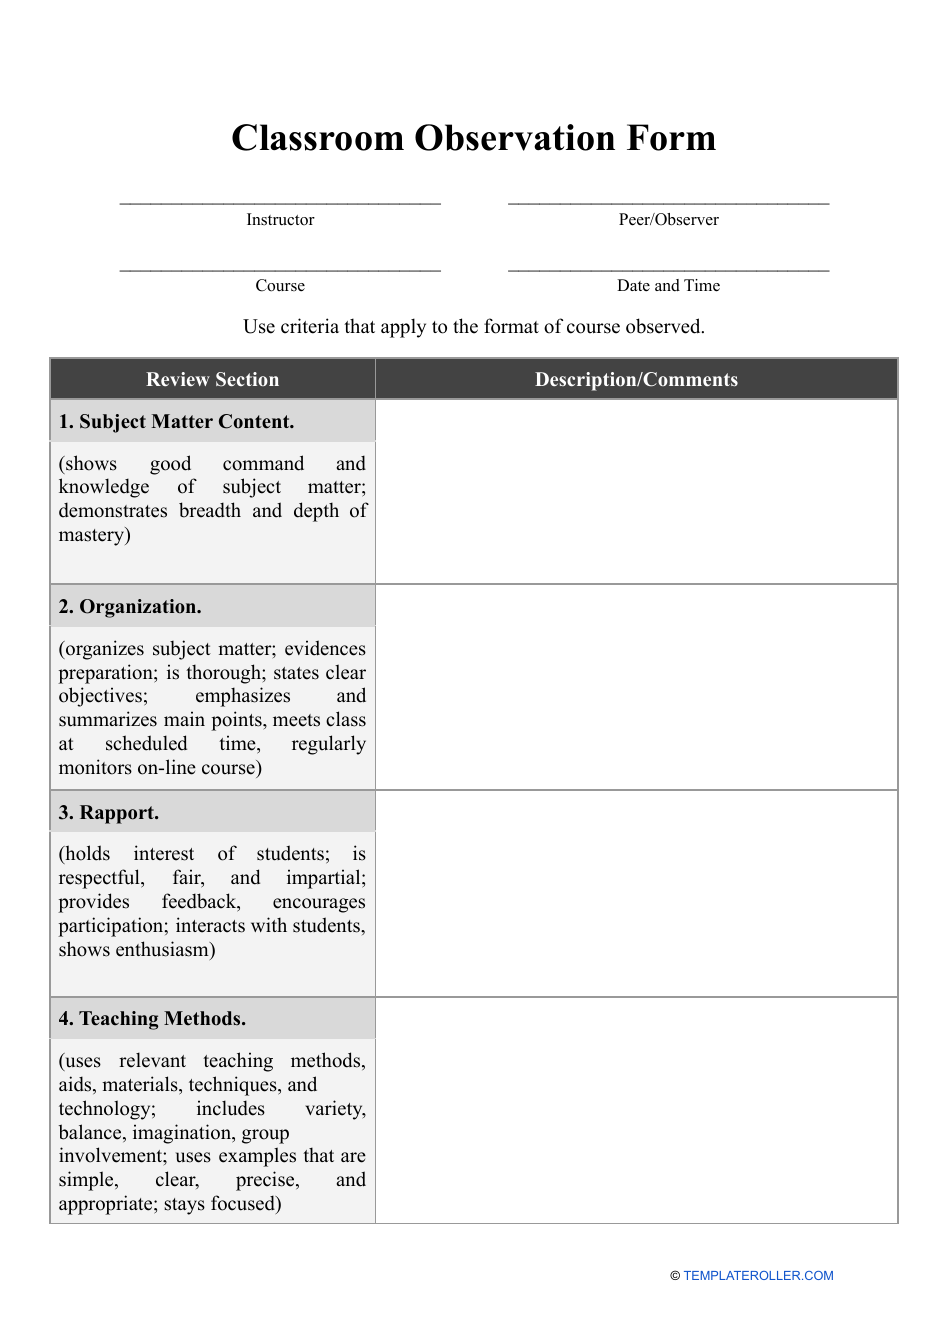 Classroom Observation Form - Big Table, Page 1